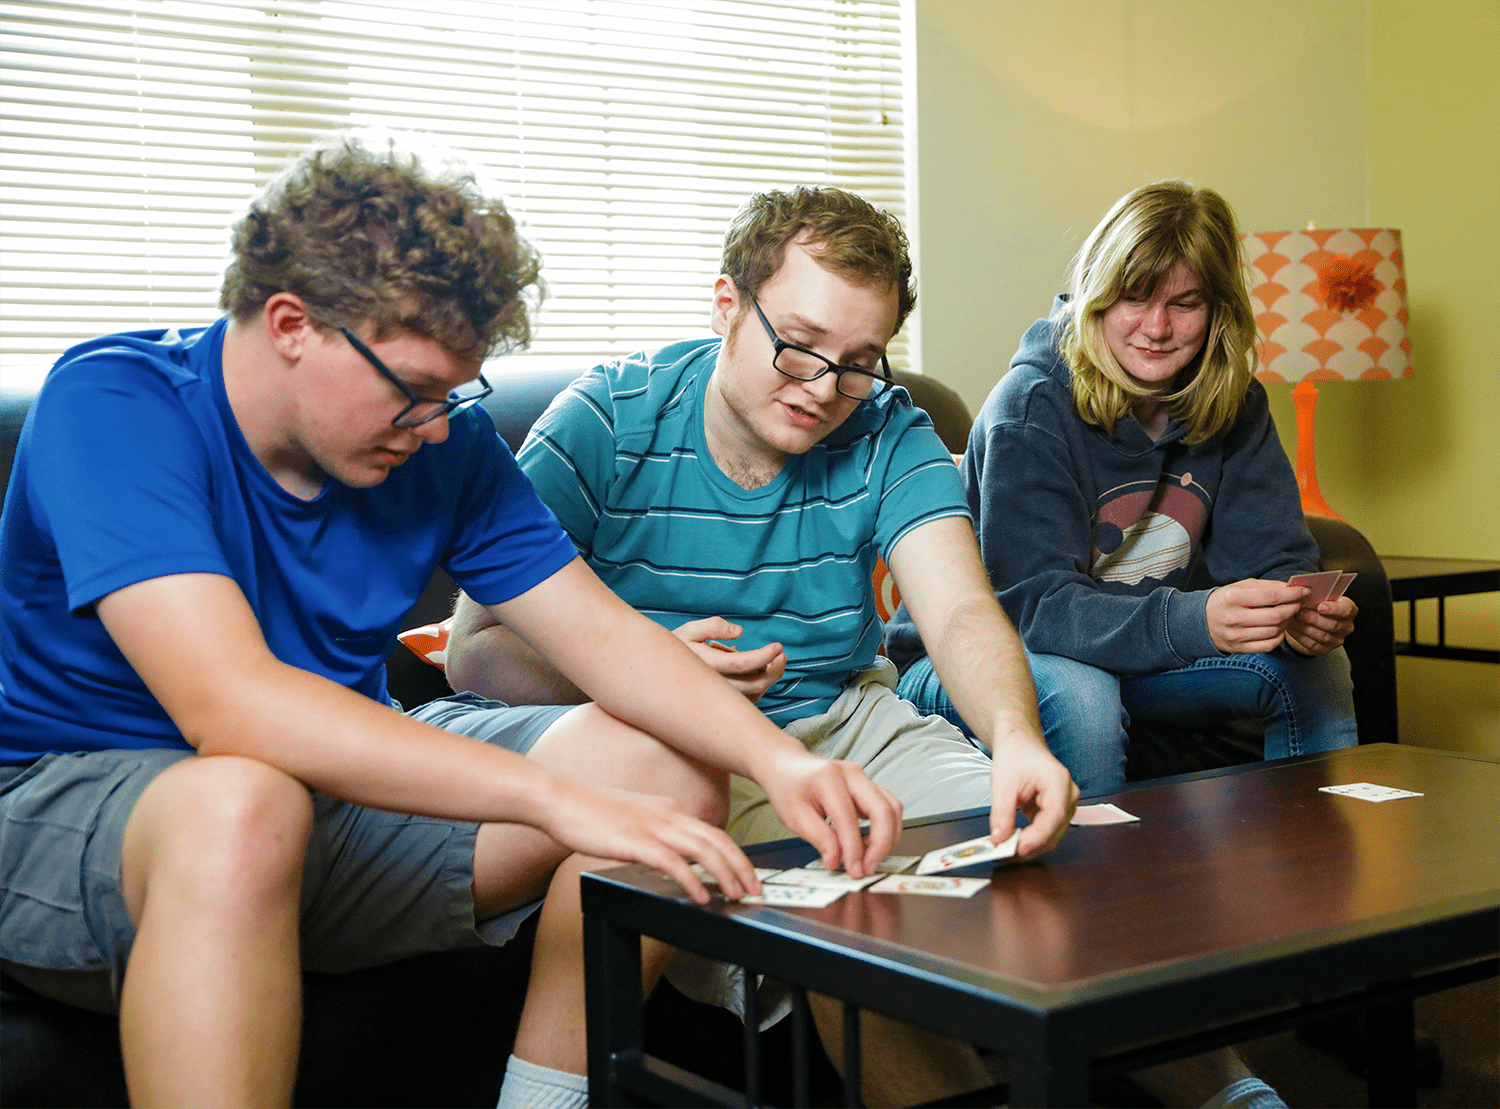 A photo of students playing cards in their dorm.